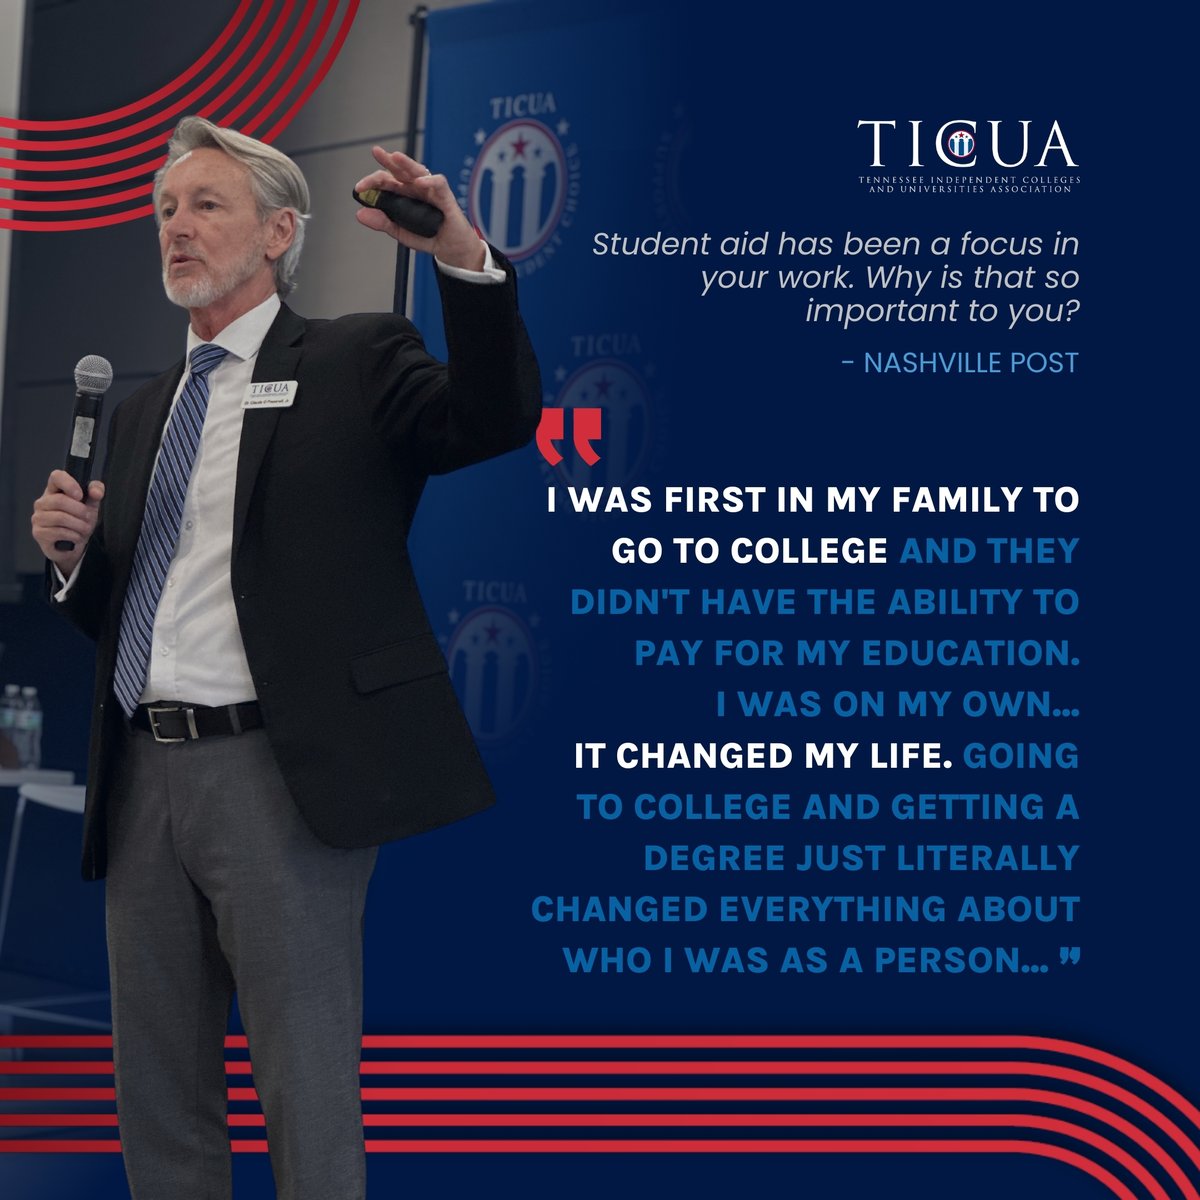 TICUA President Claude Pressnell sat down with Nashville Post to reflect on his career leading up to his retirement announcement. He discussed his past as a first-generation college student and Pell Grant recipient, the key challenges of his career, and why he feels it is still…